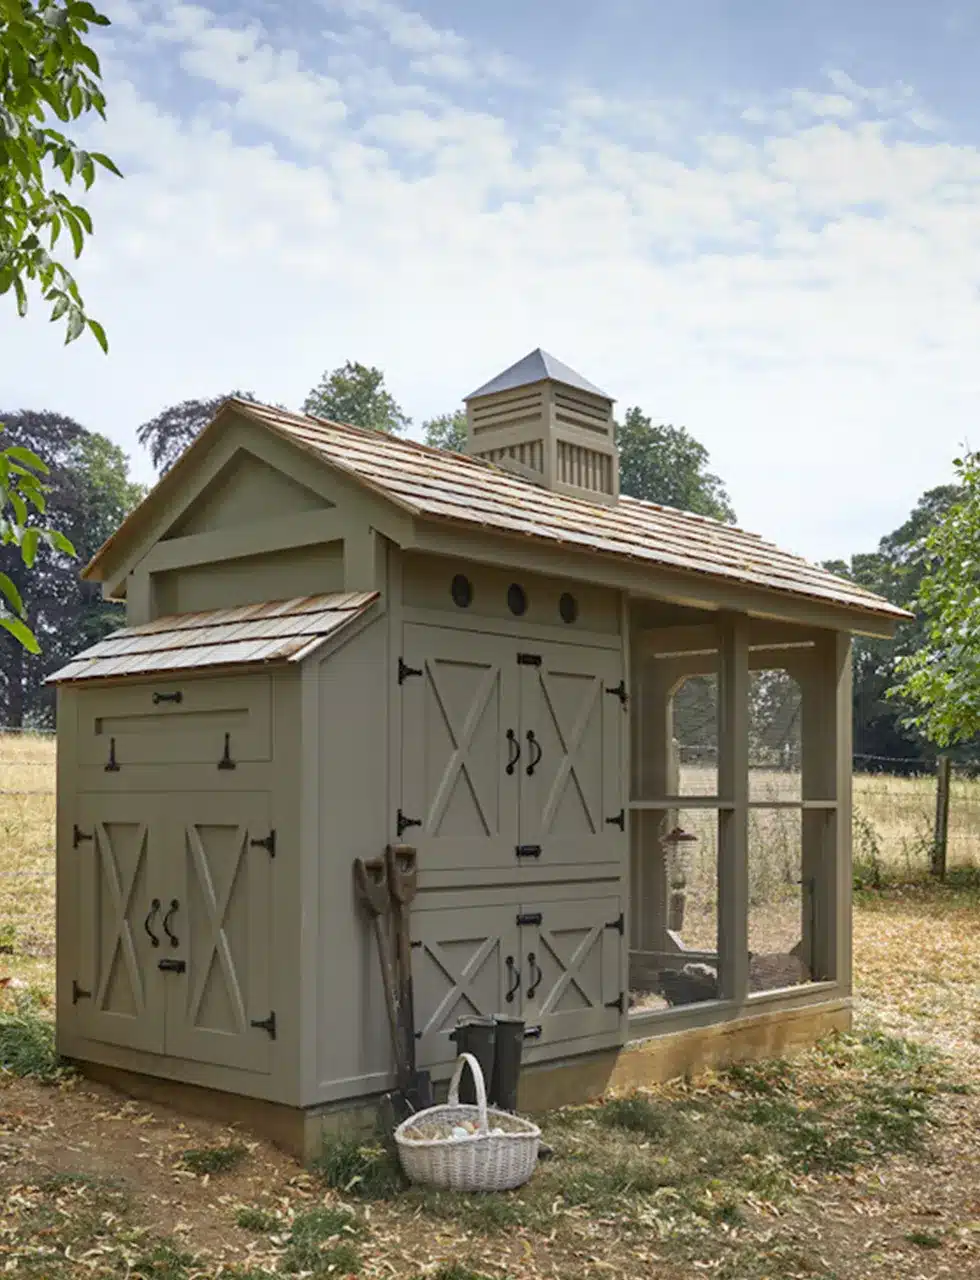 A chicken coop in the english countryside, designed in america, rustic barn style